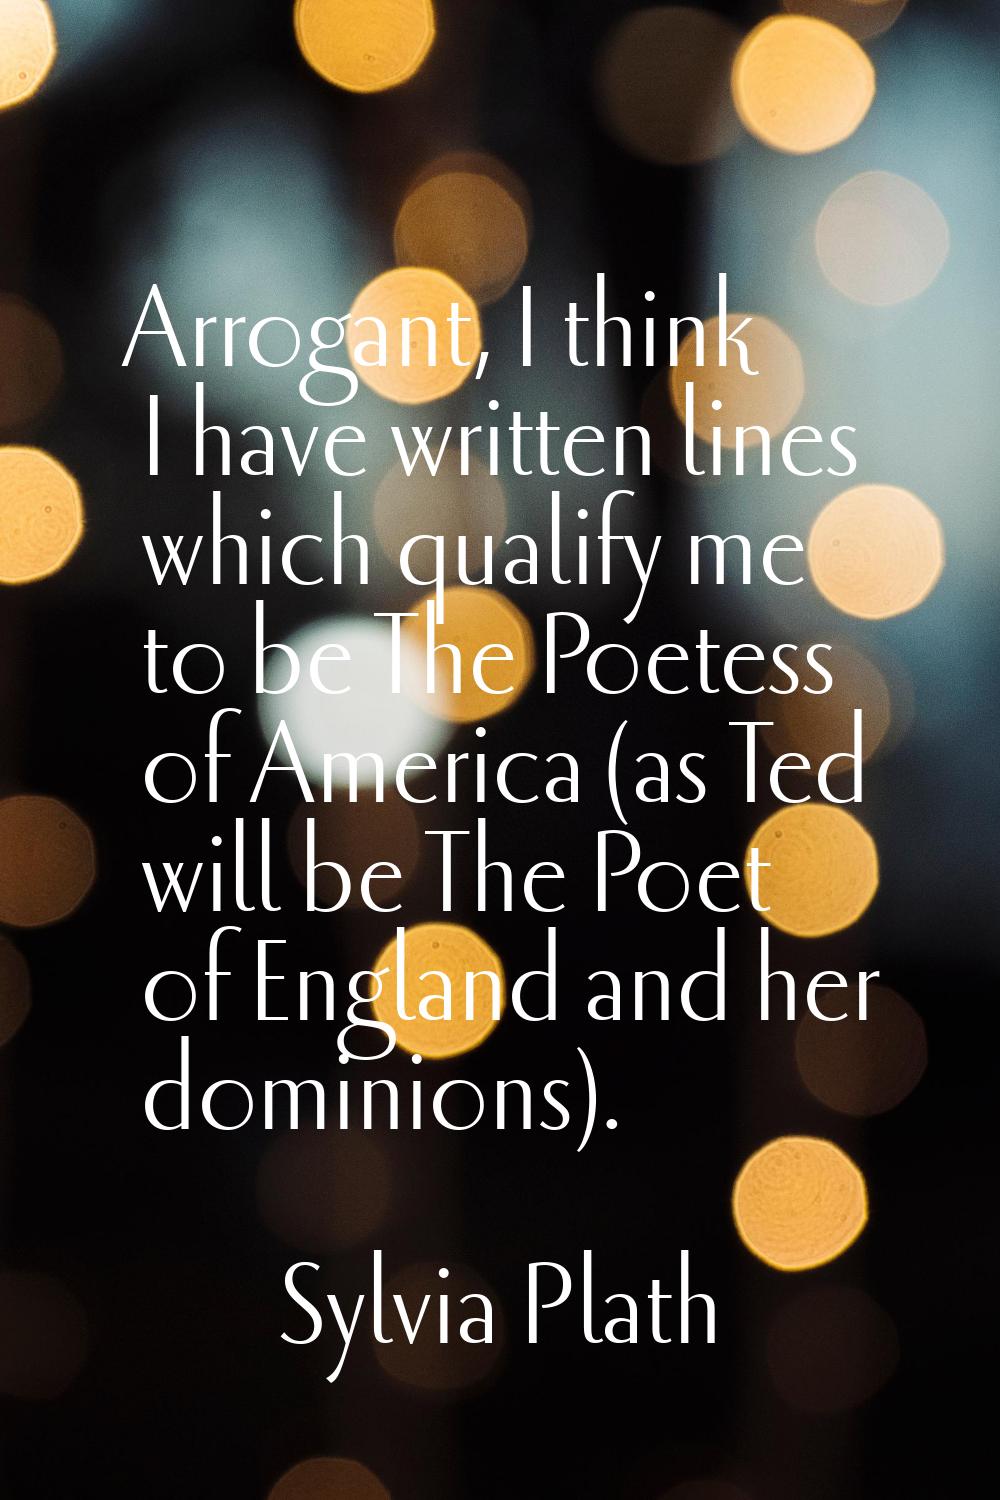 Arrogant, I think I have written lines which qualify me to be The Poetess of America (as Ted will b